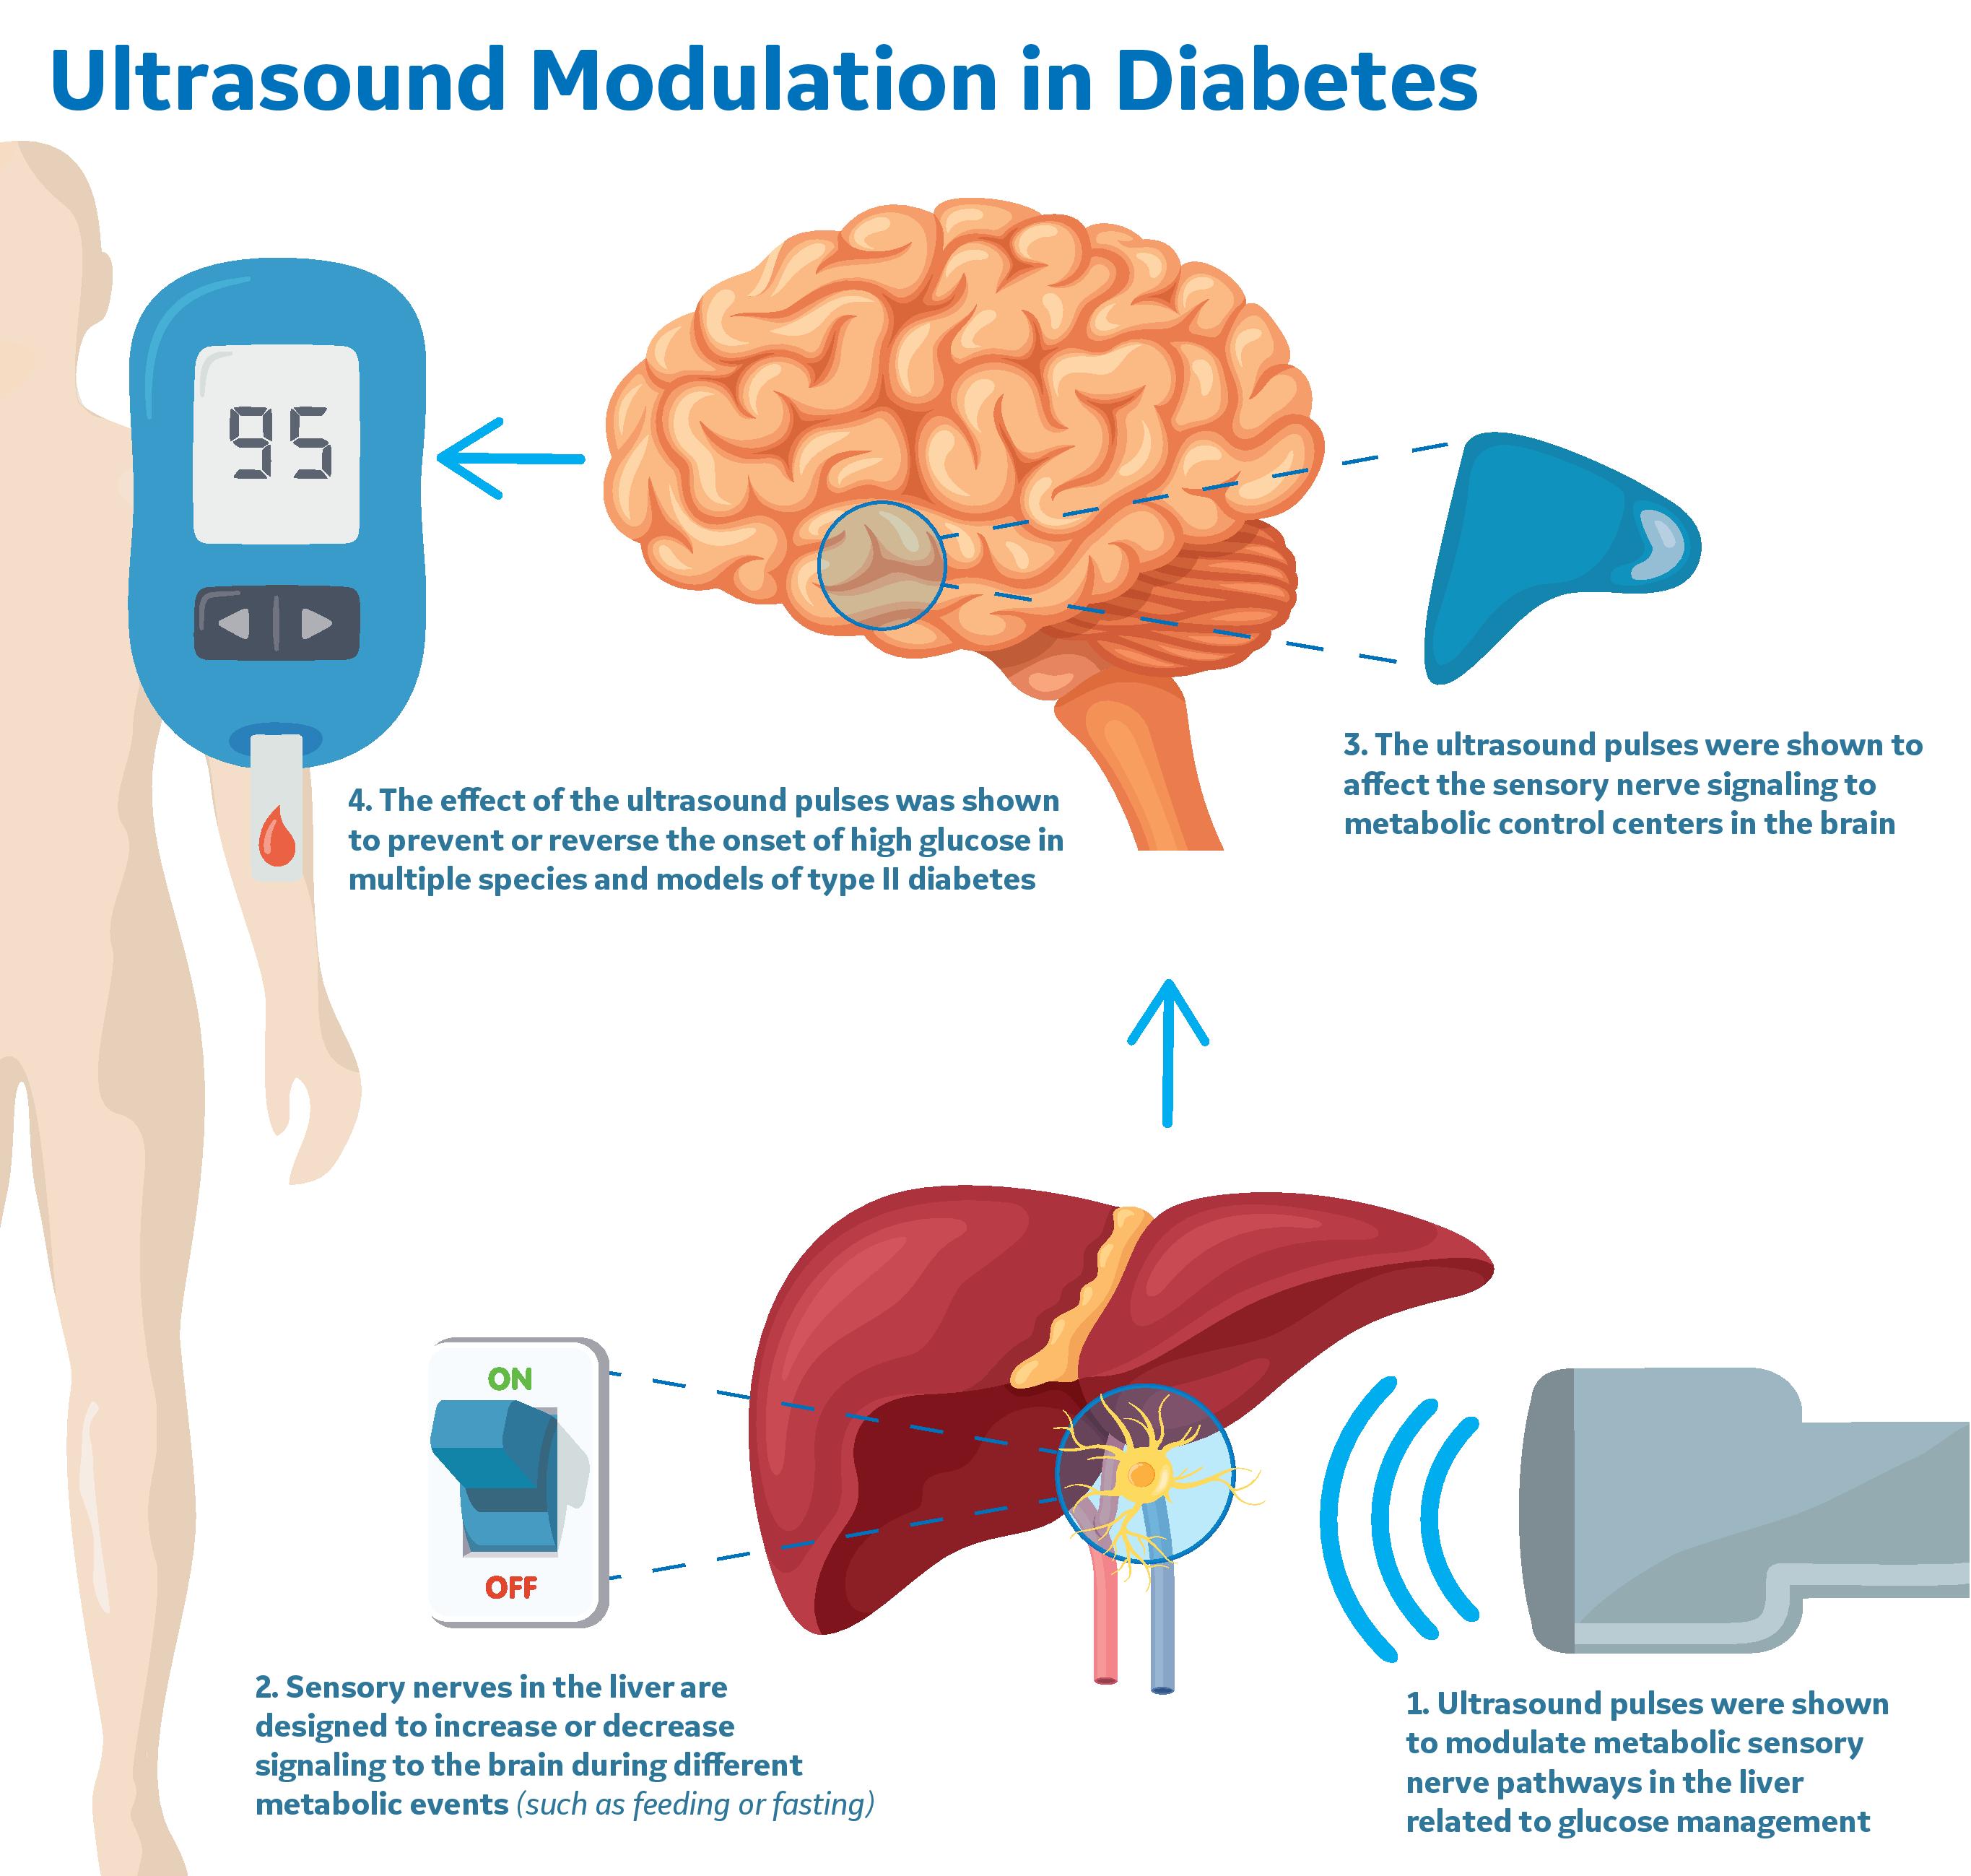 Ultrasound Modulation in Diabetes final credit GE Research